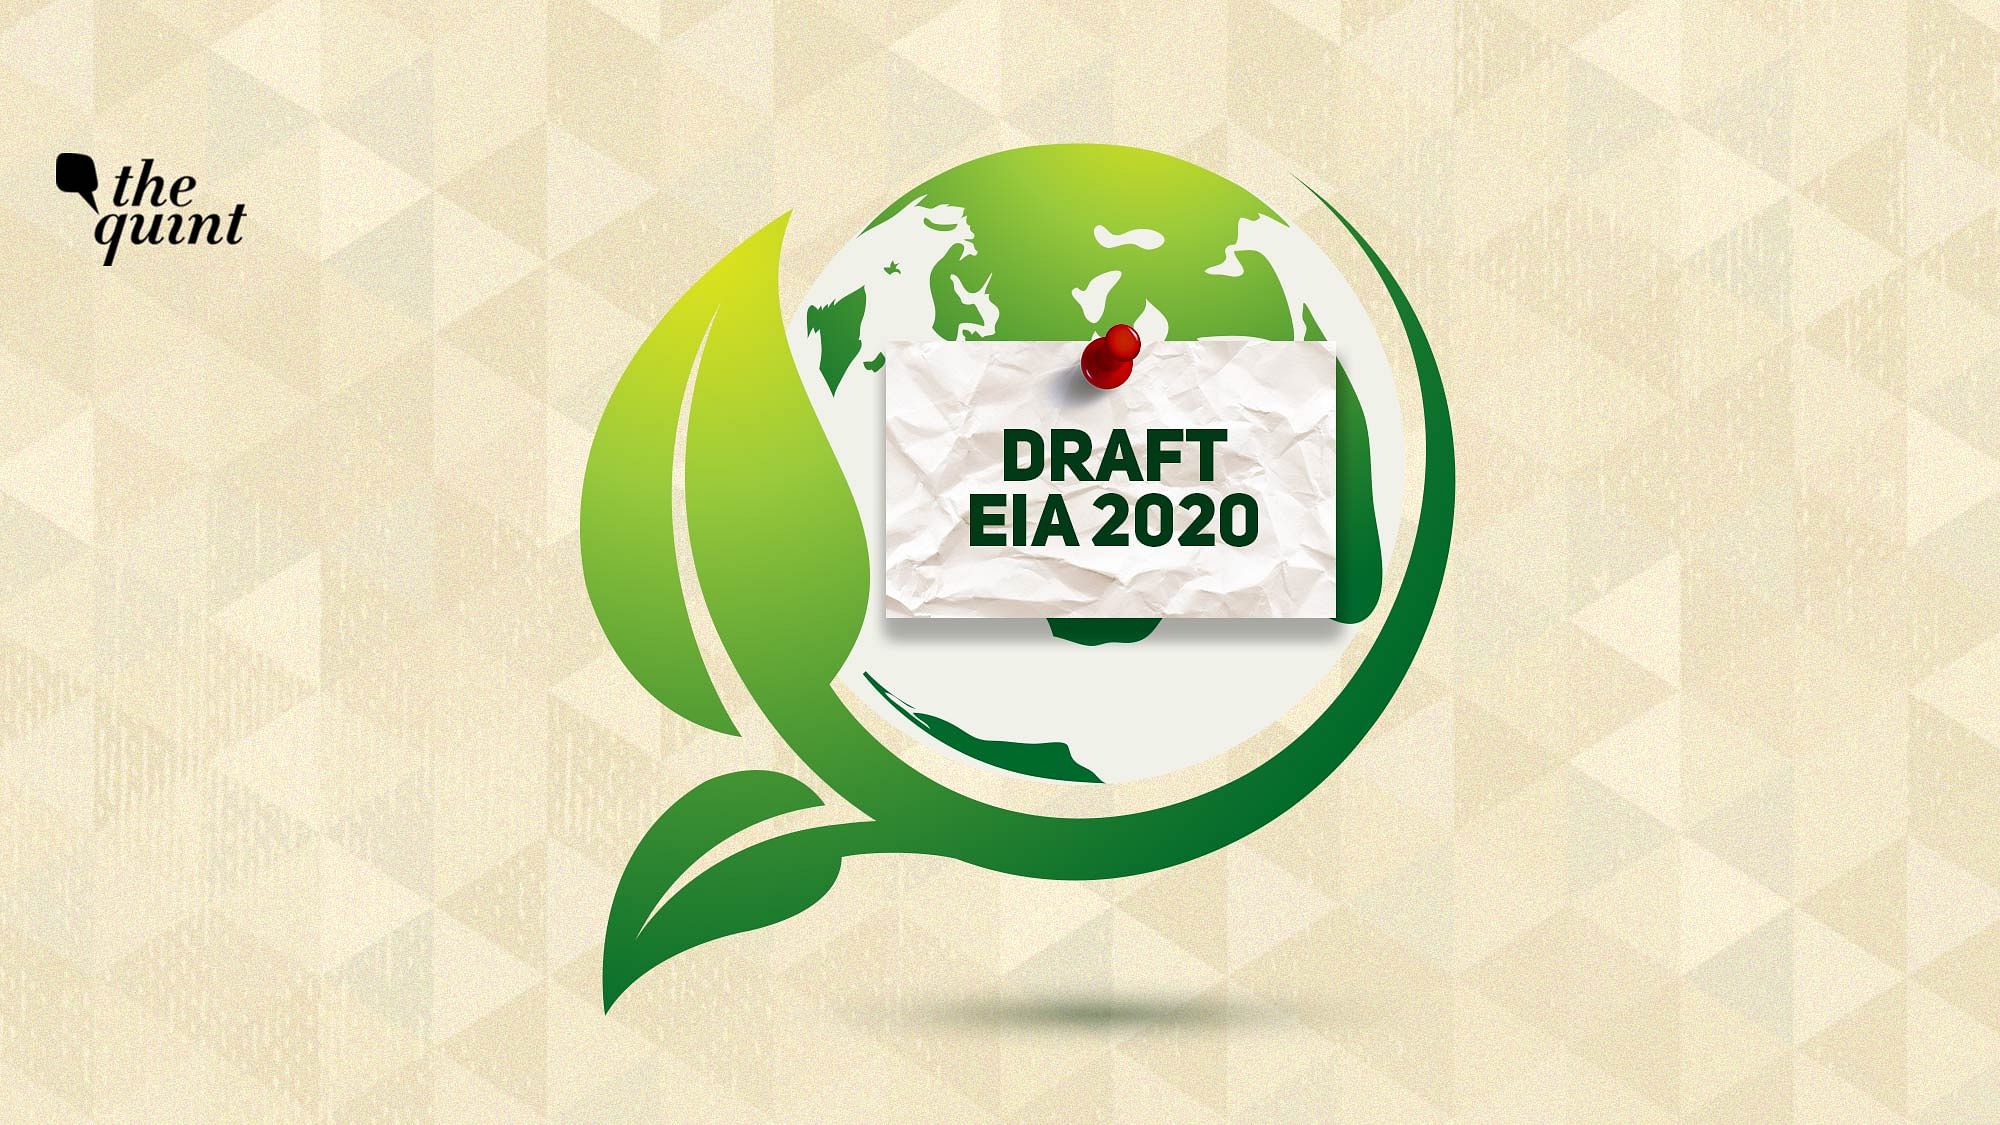 On 30 June, the high court had asked MOEF to publish the Draft Notification in regional languages mentioned in the eighth schedule of the Constitution by 10 August. The bench had also pointed out that the deadline for filing objections to the Draft EIA Notification was 11 August.